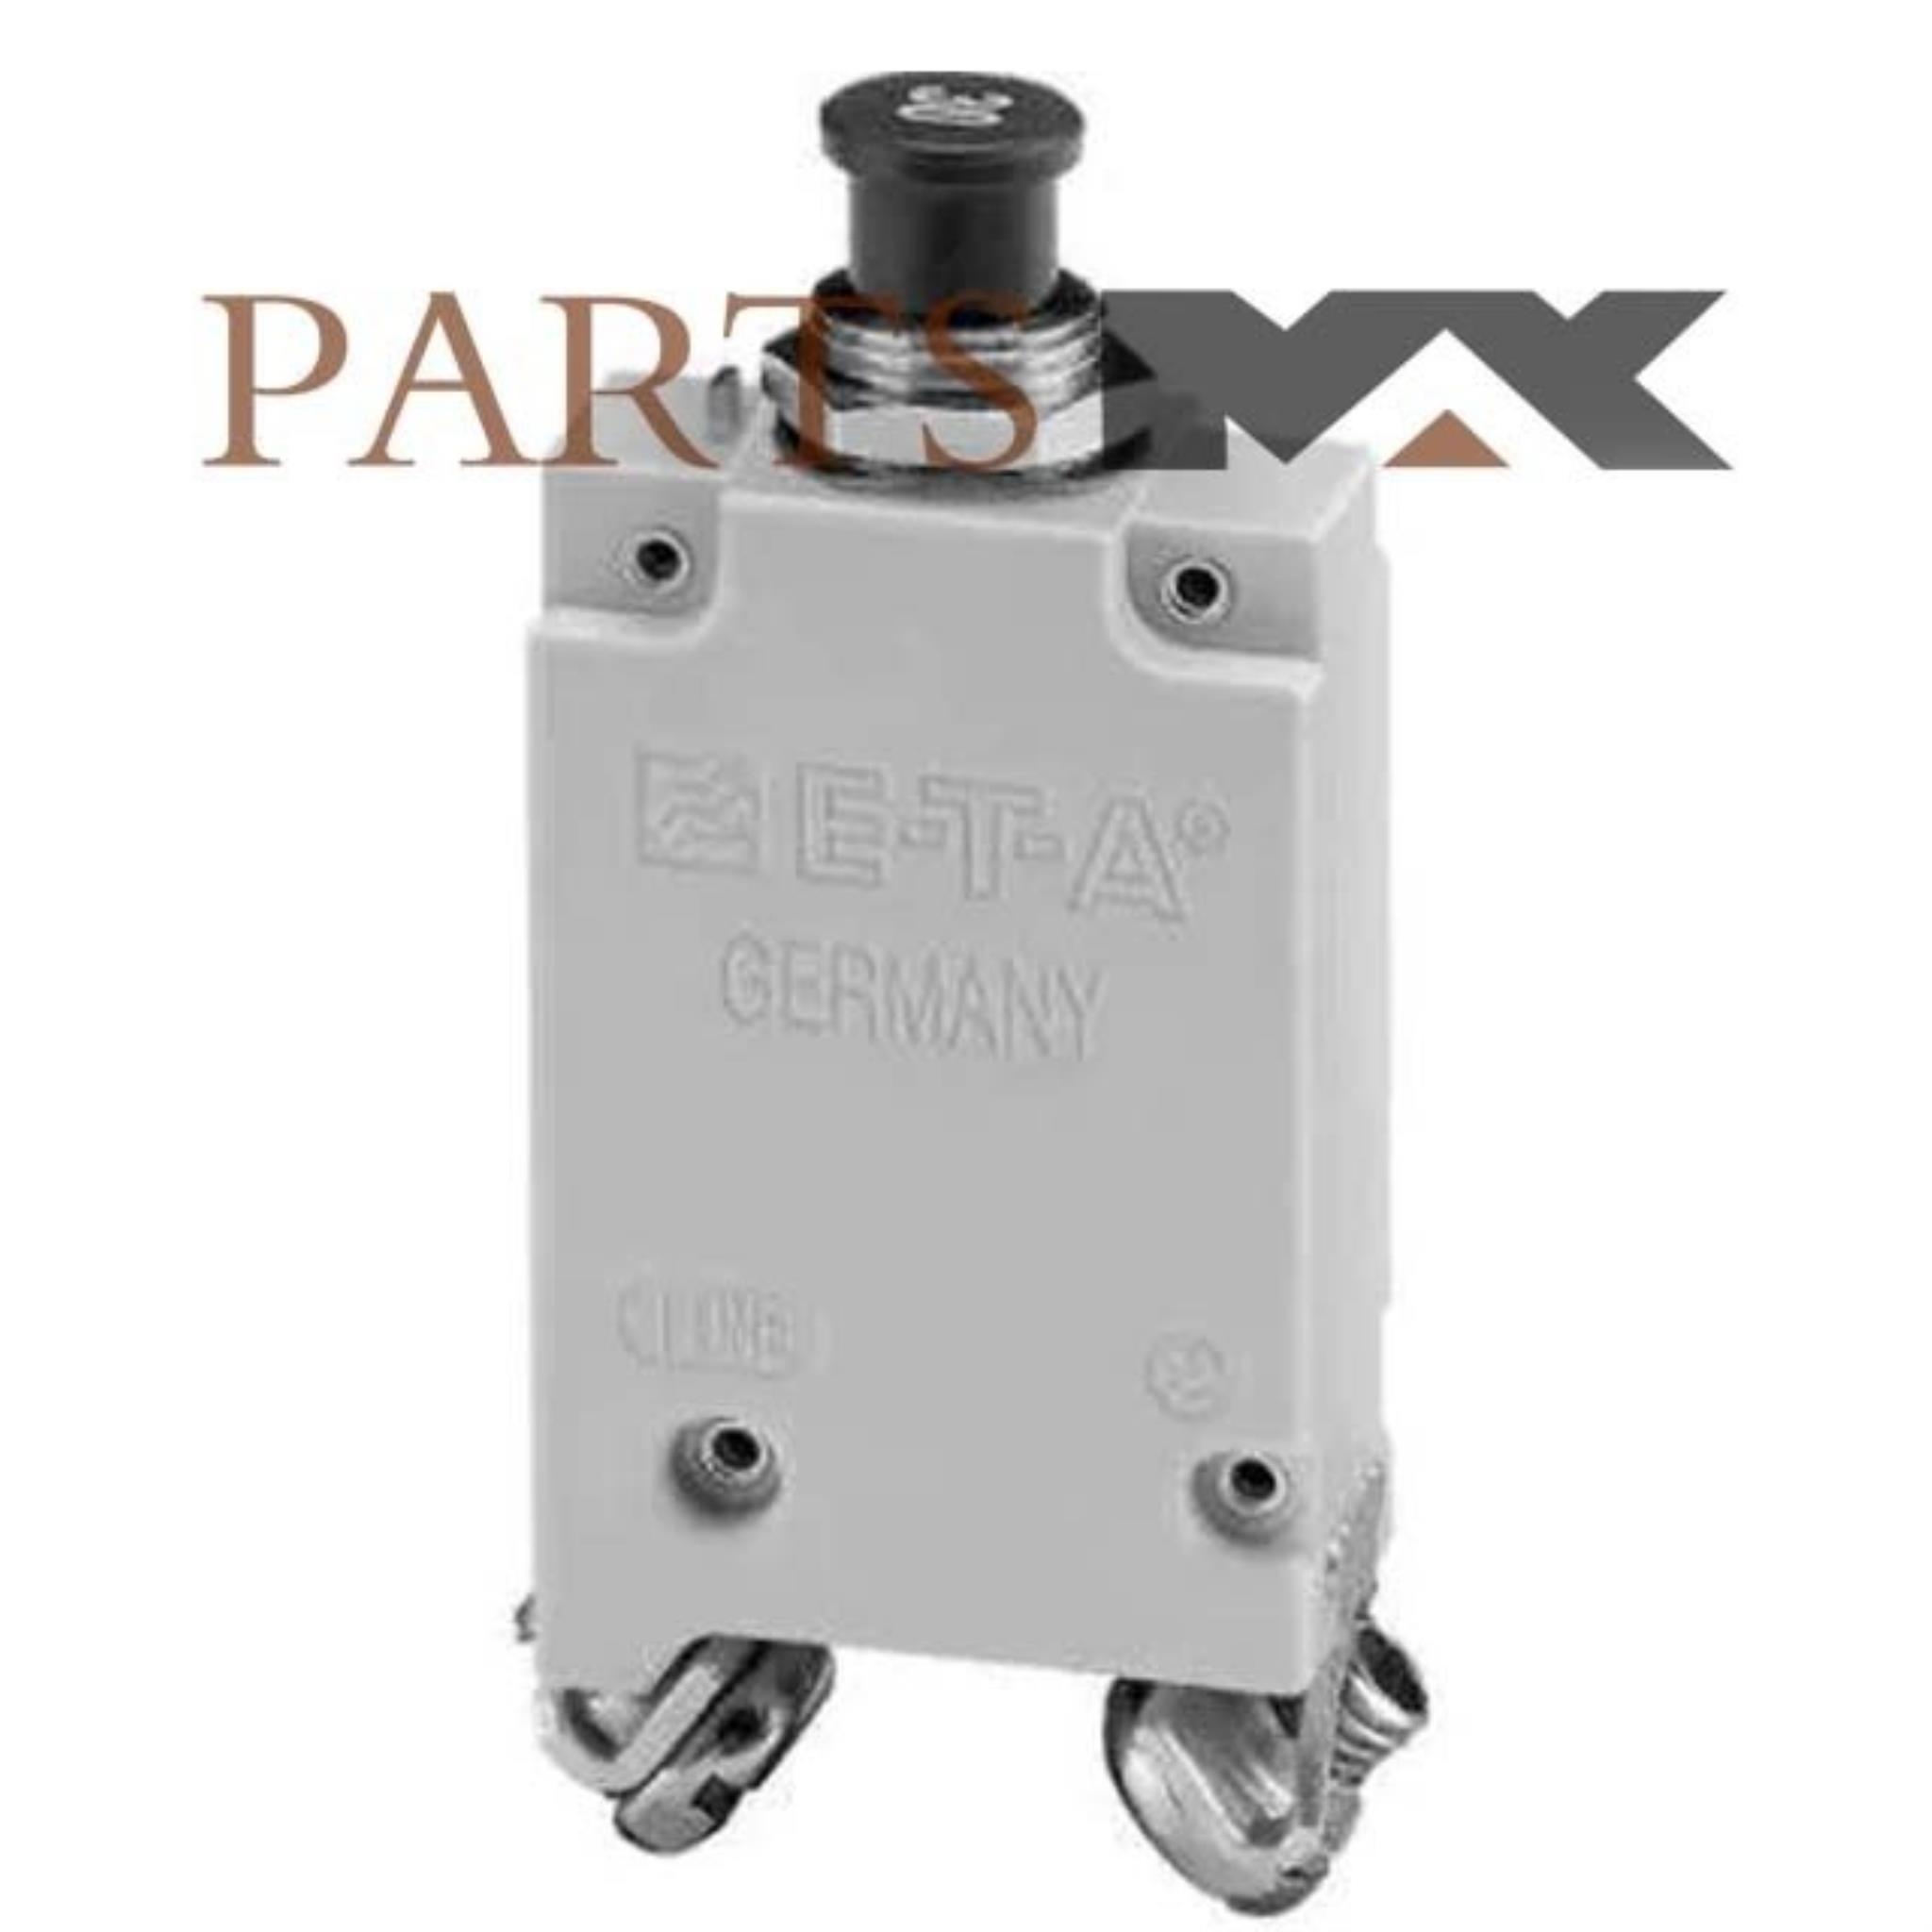 Picture of 413-K54-FN2-35A E-T-A | Partsmax Türkiye